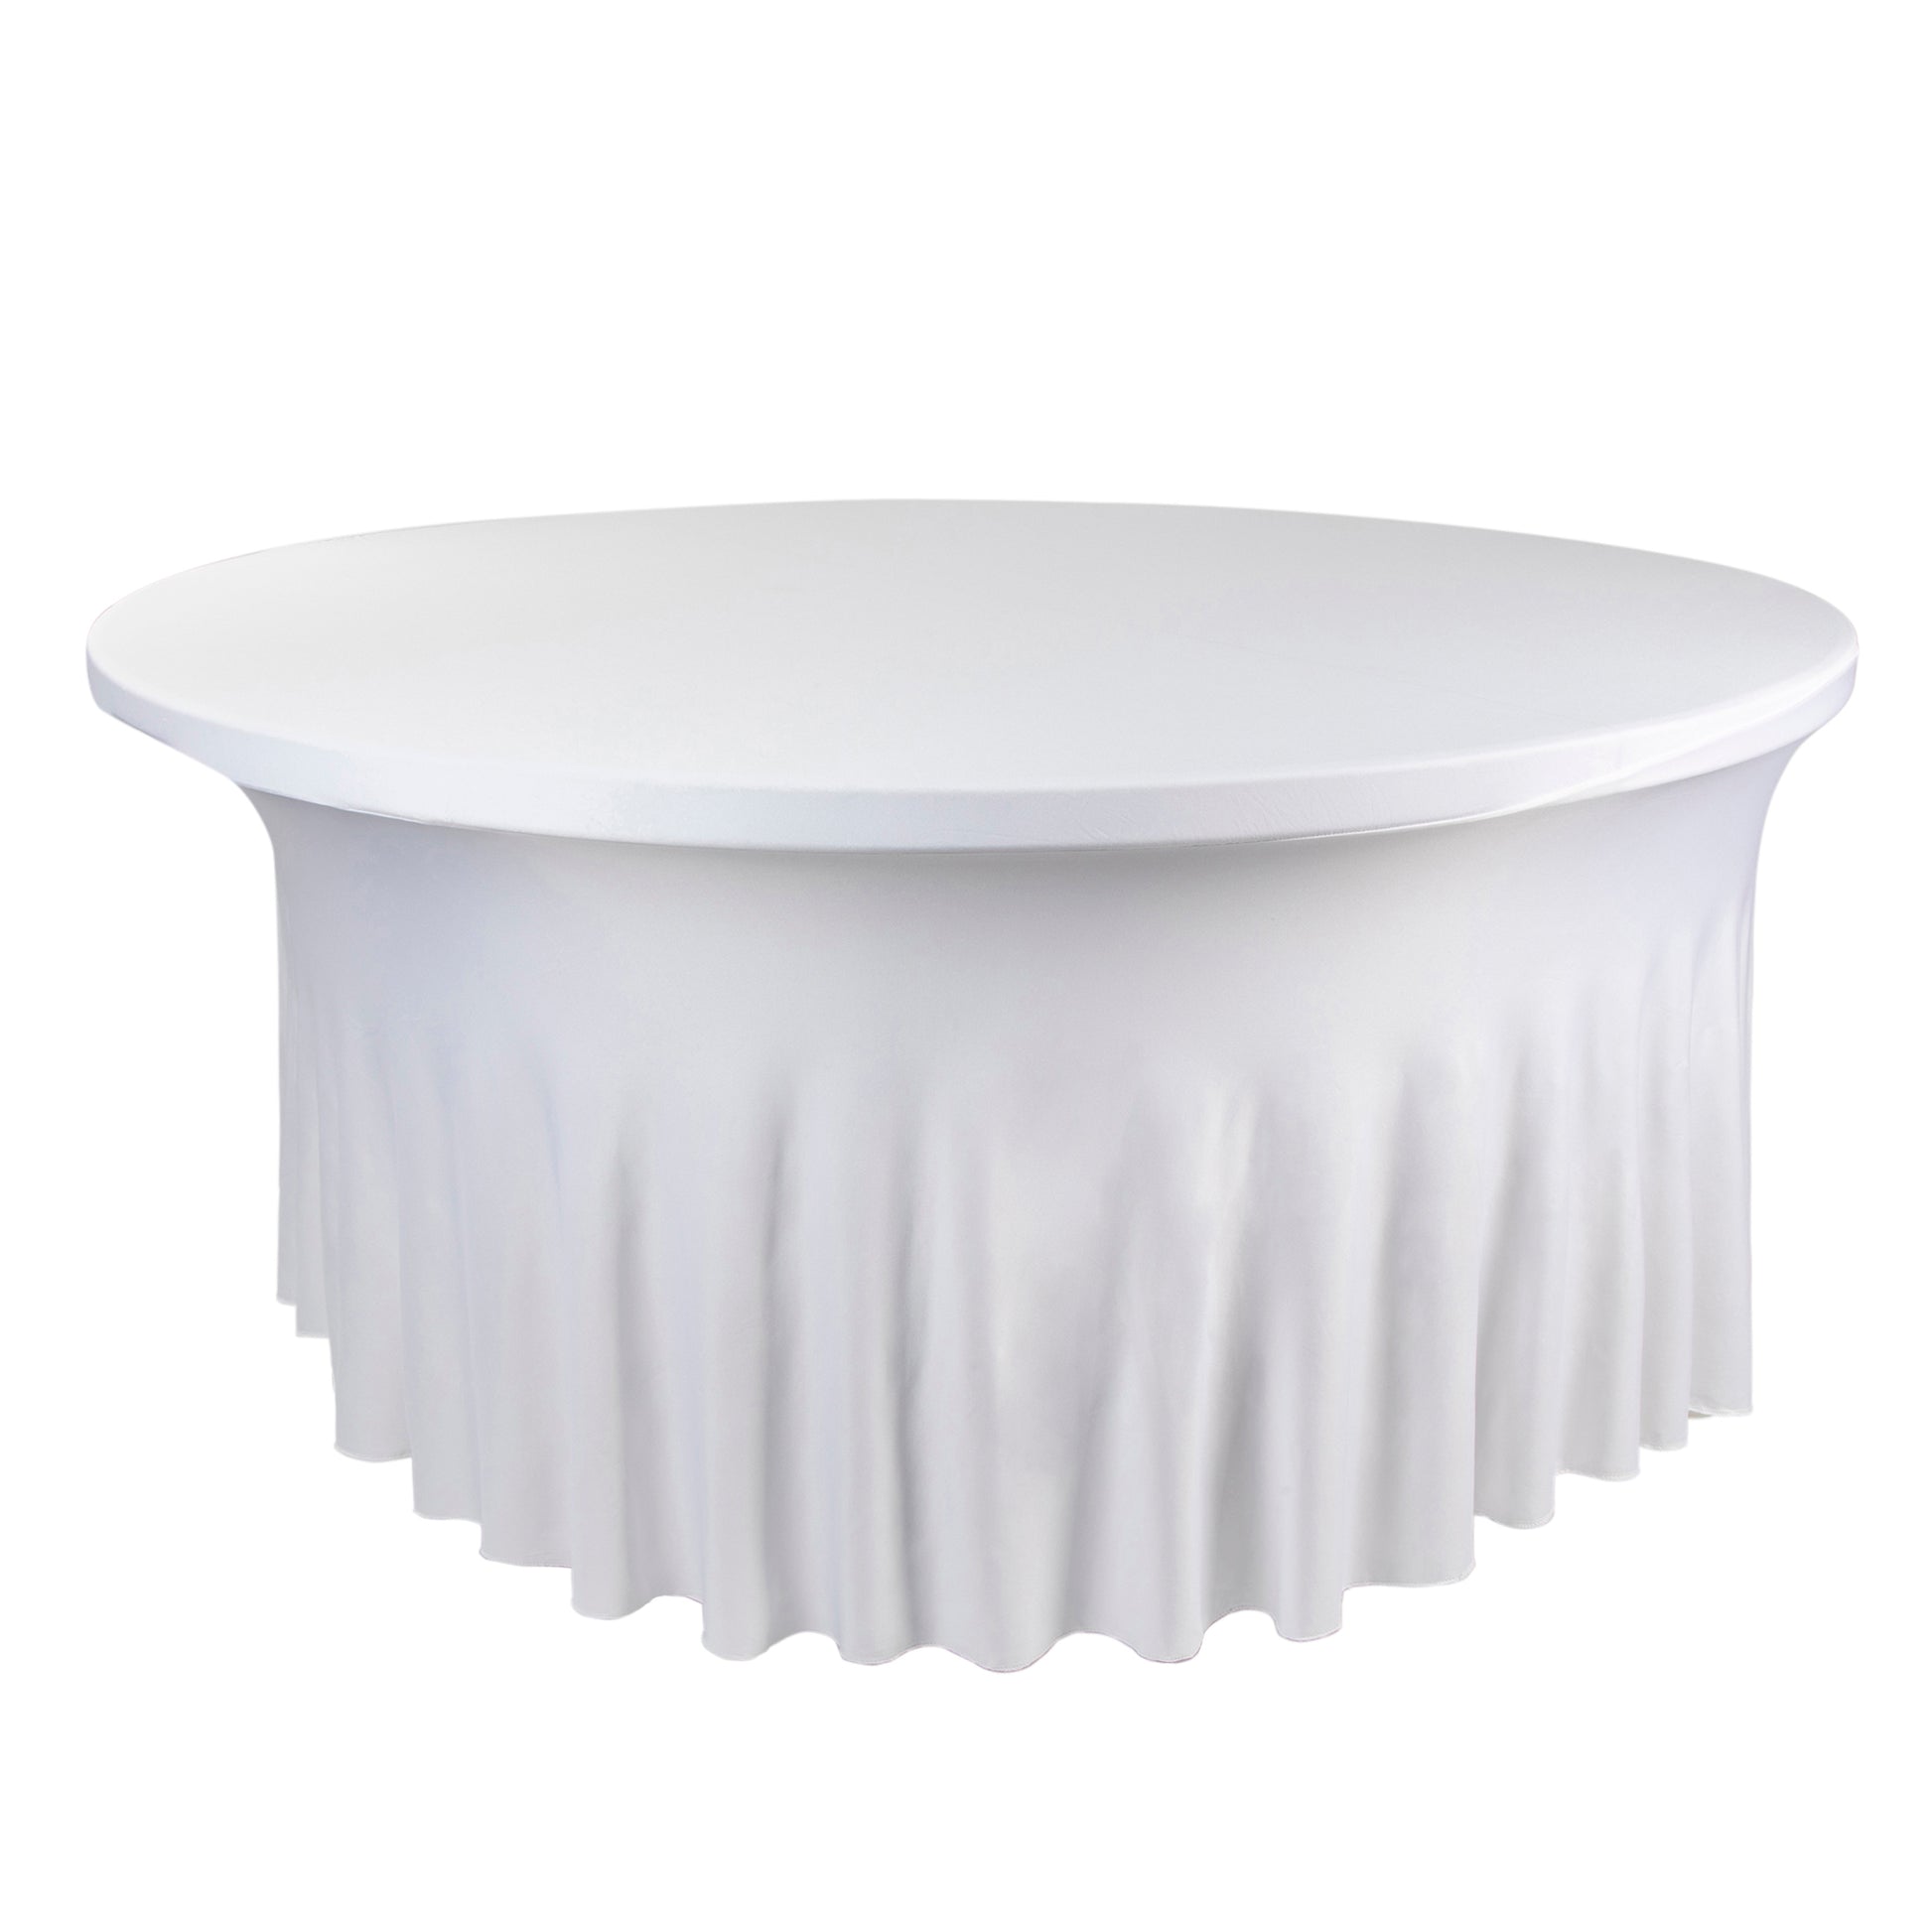 Wavy Spandex Table Cover 5ft Round - White